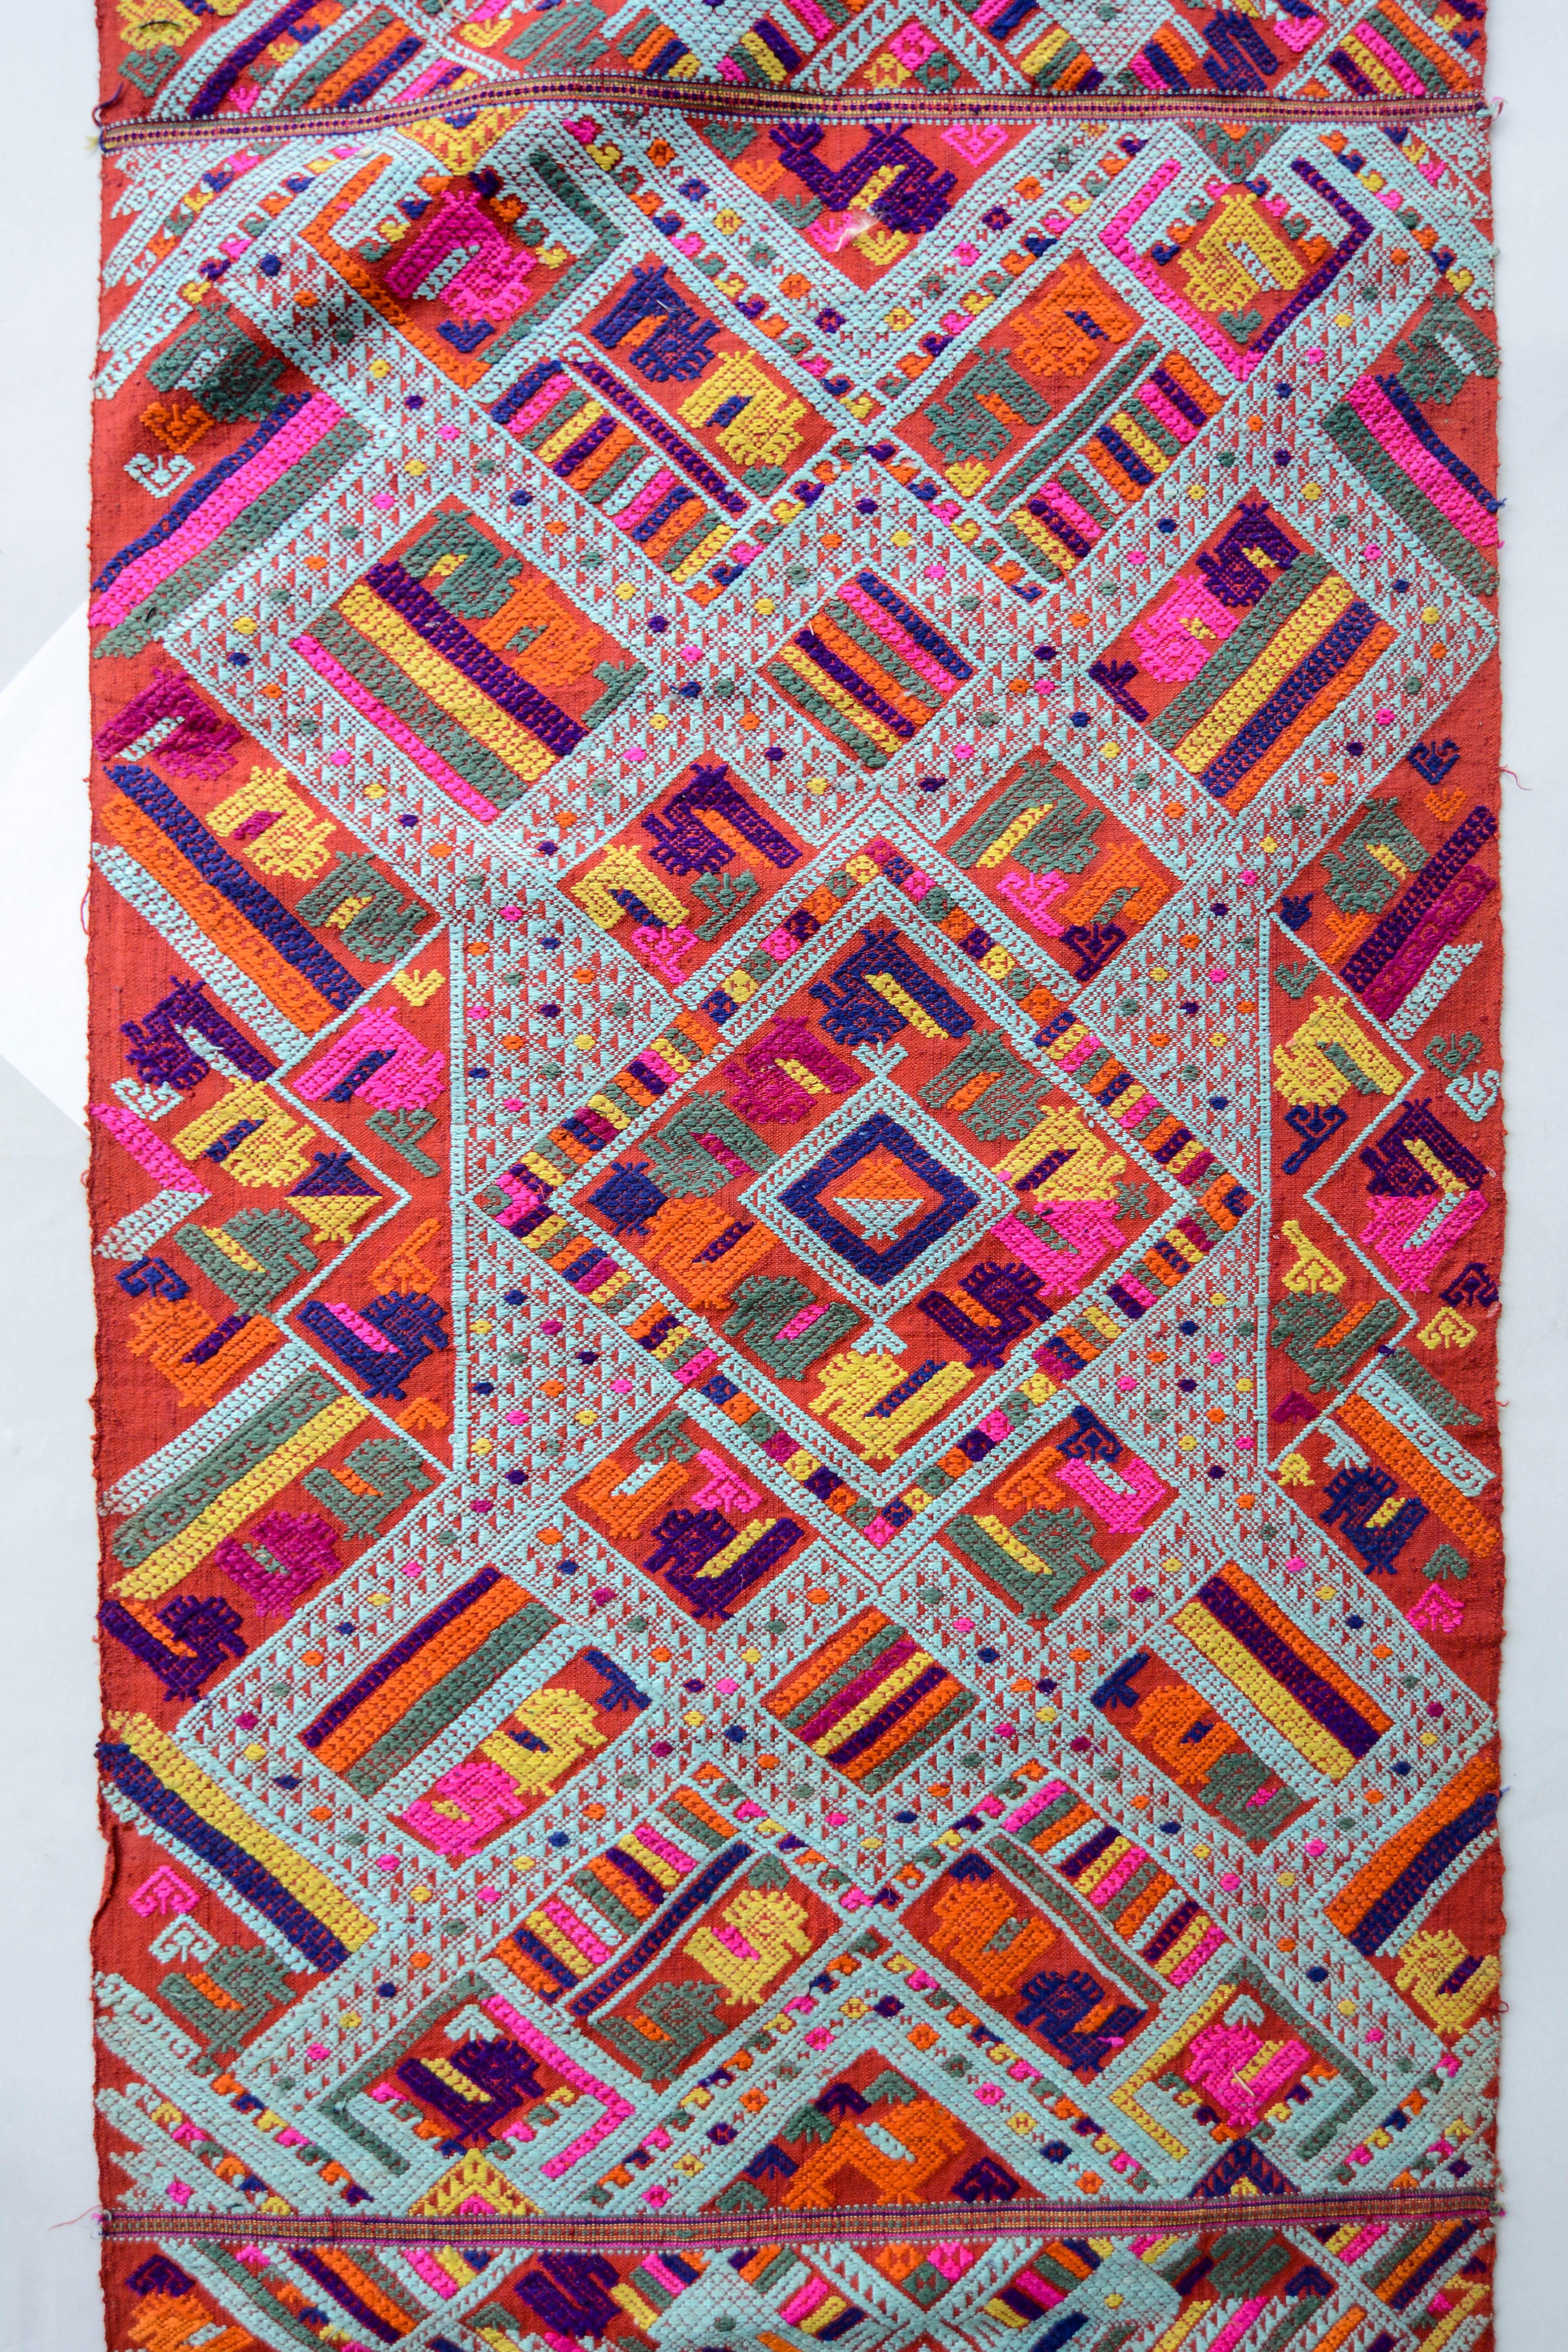 Vintage handwoven silk shawl end panel Tai Nue from Laos mid-20th century. Supplementary weft technique, with geometric designs and depicting mythological animals (nak river dragons) with protective qualities.
This intricately woven end piece is